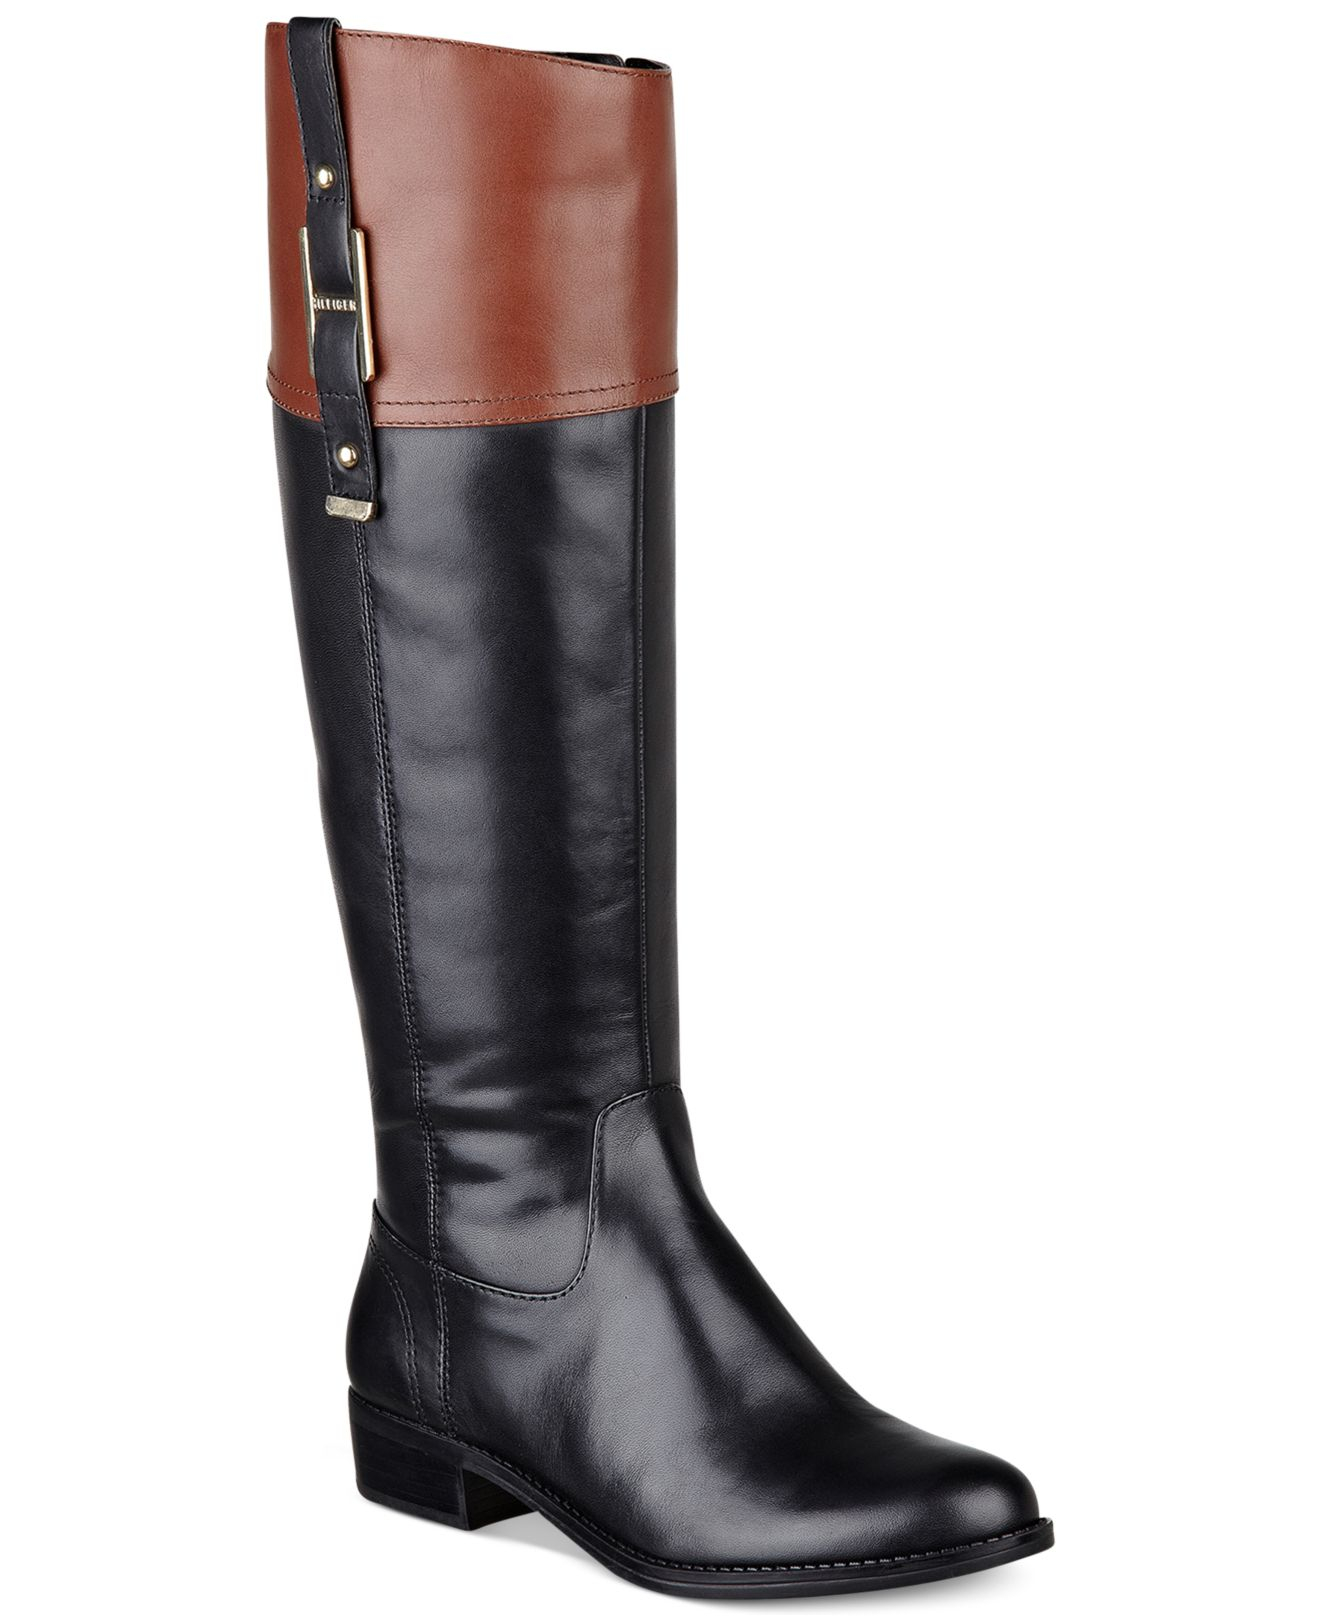 Lyst - Tommy hilfiger Women'S Gibsy Tall Riding Boots in Black